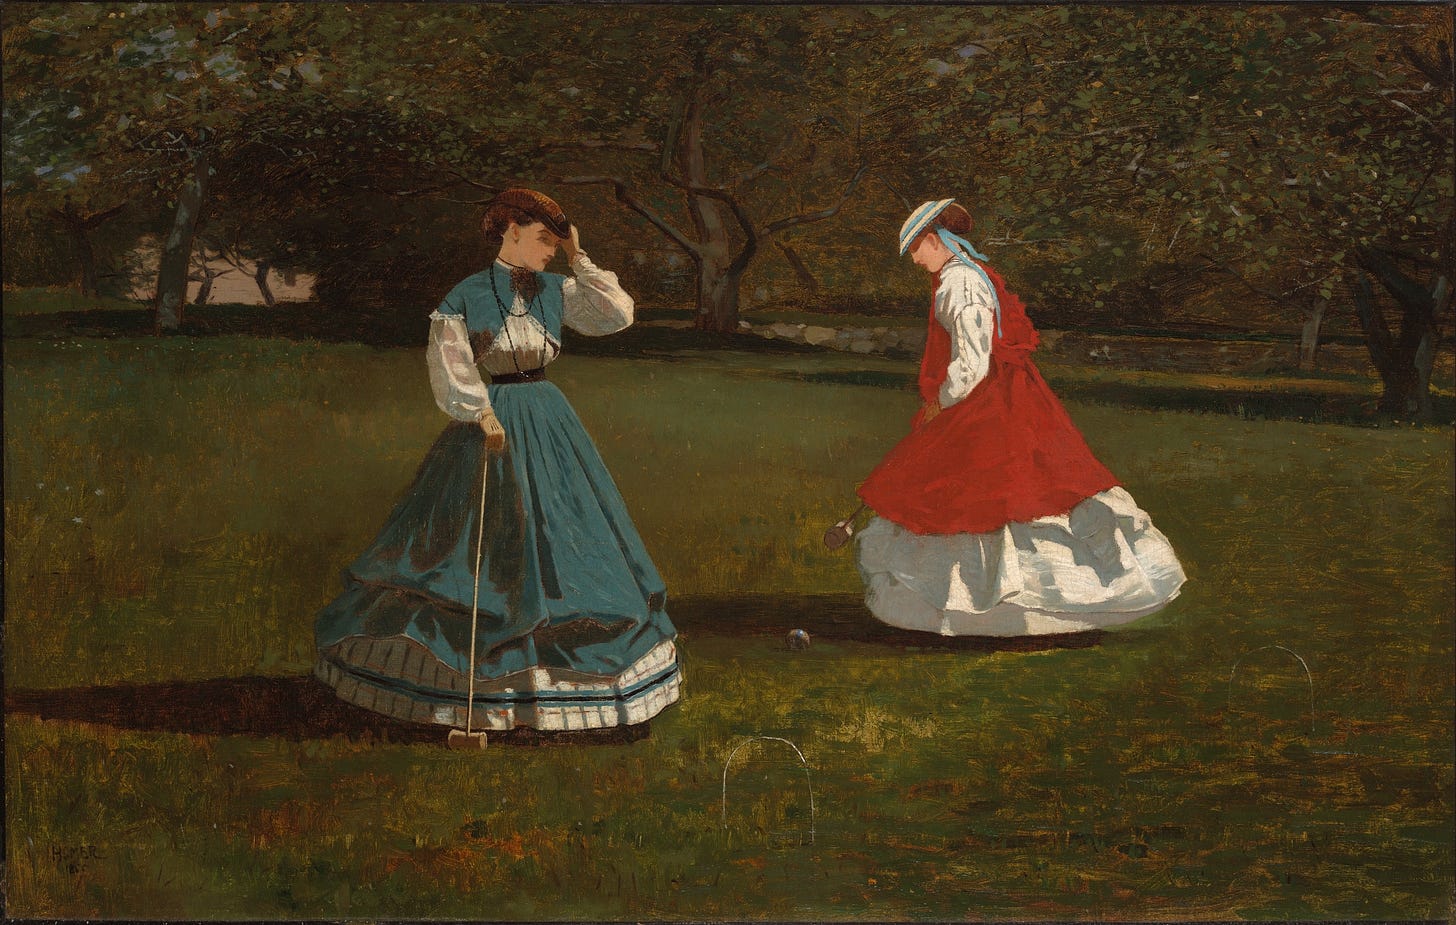 A Game of Croquet (1866)